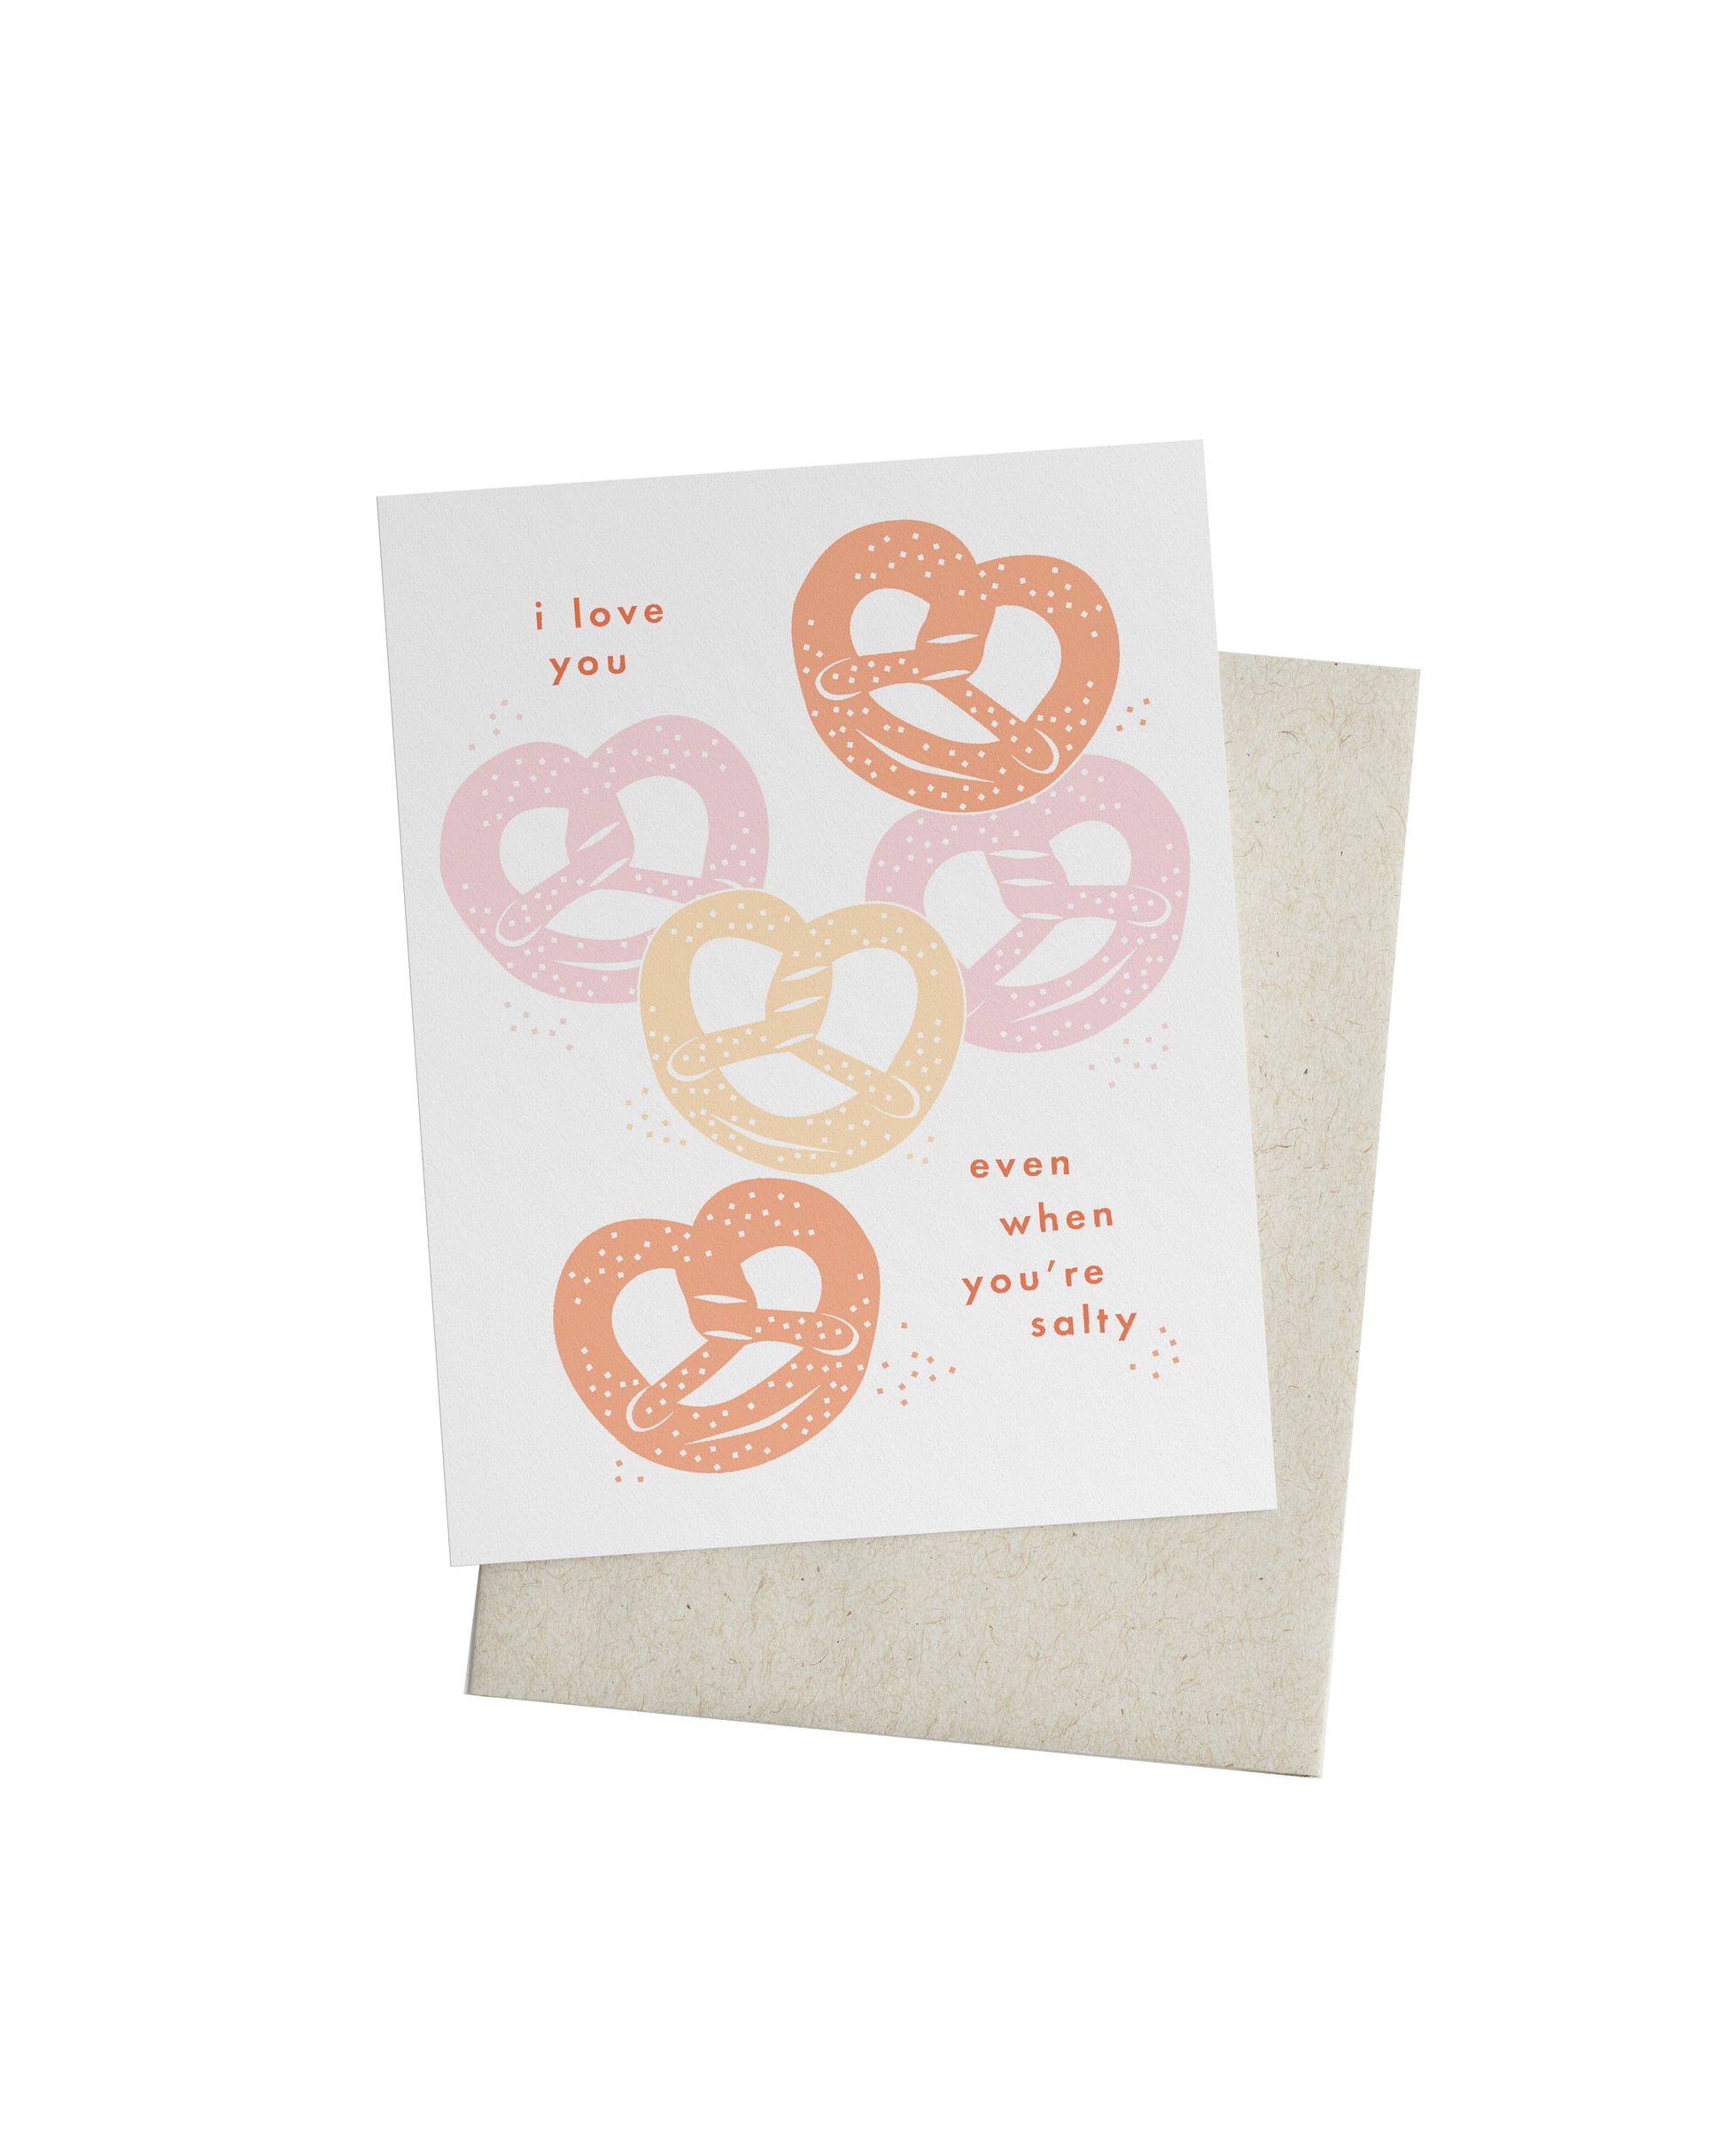 Pretzel greeting card that reads "I love you even when you're salty" and has five salted pretzels on it 